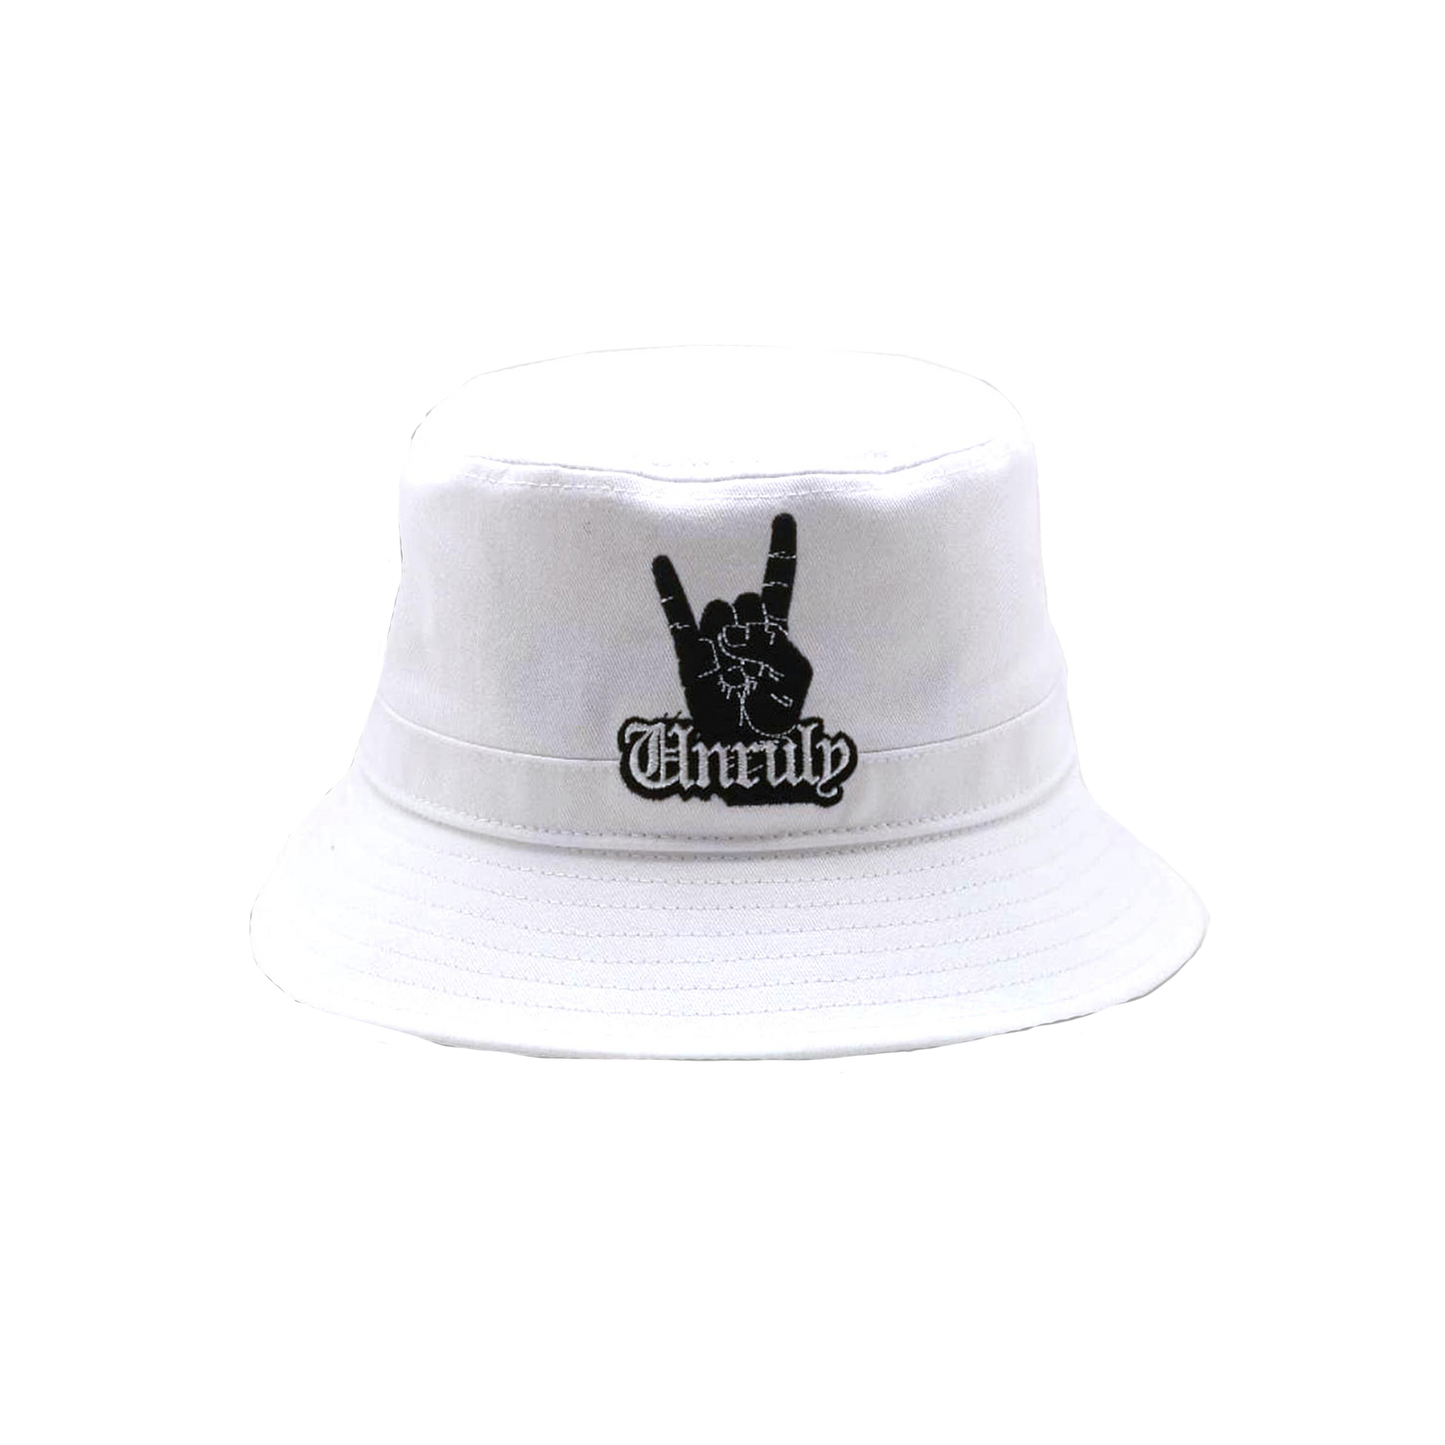 Unruly Bucket Hat - White